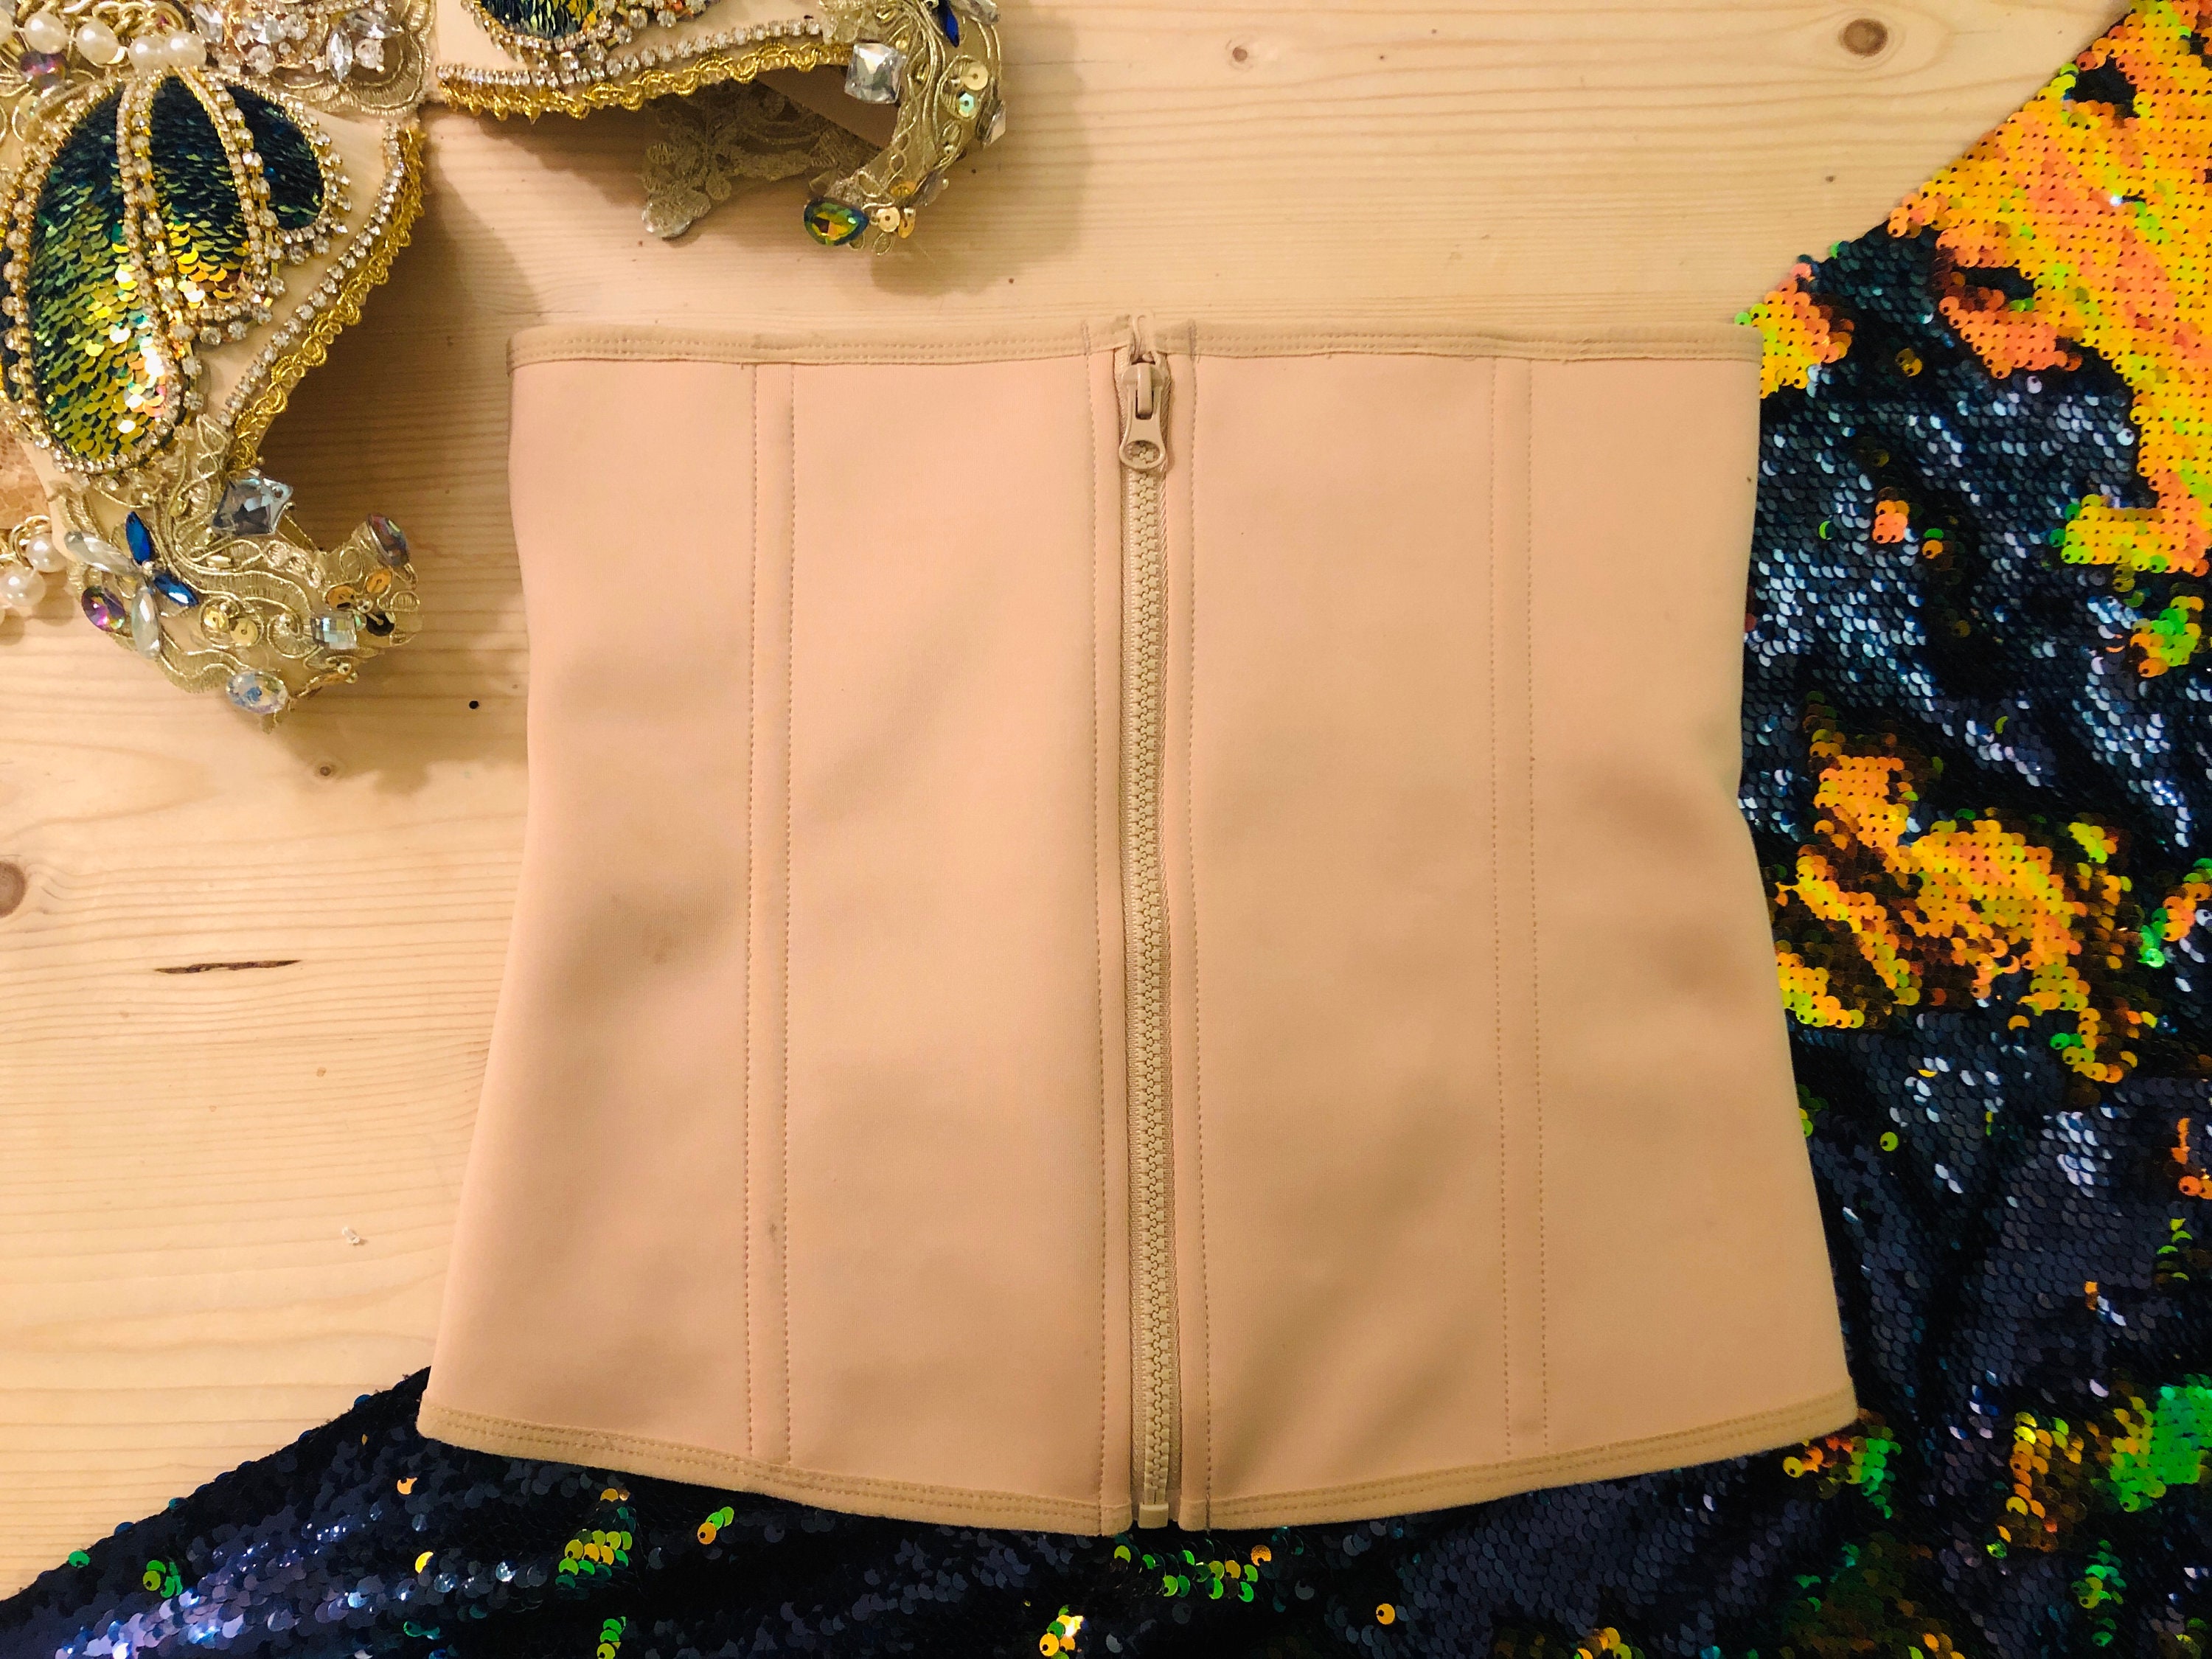 The Buoyancy Vest / Corset Shaper for all-bodied inclusive mermaid